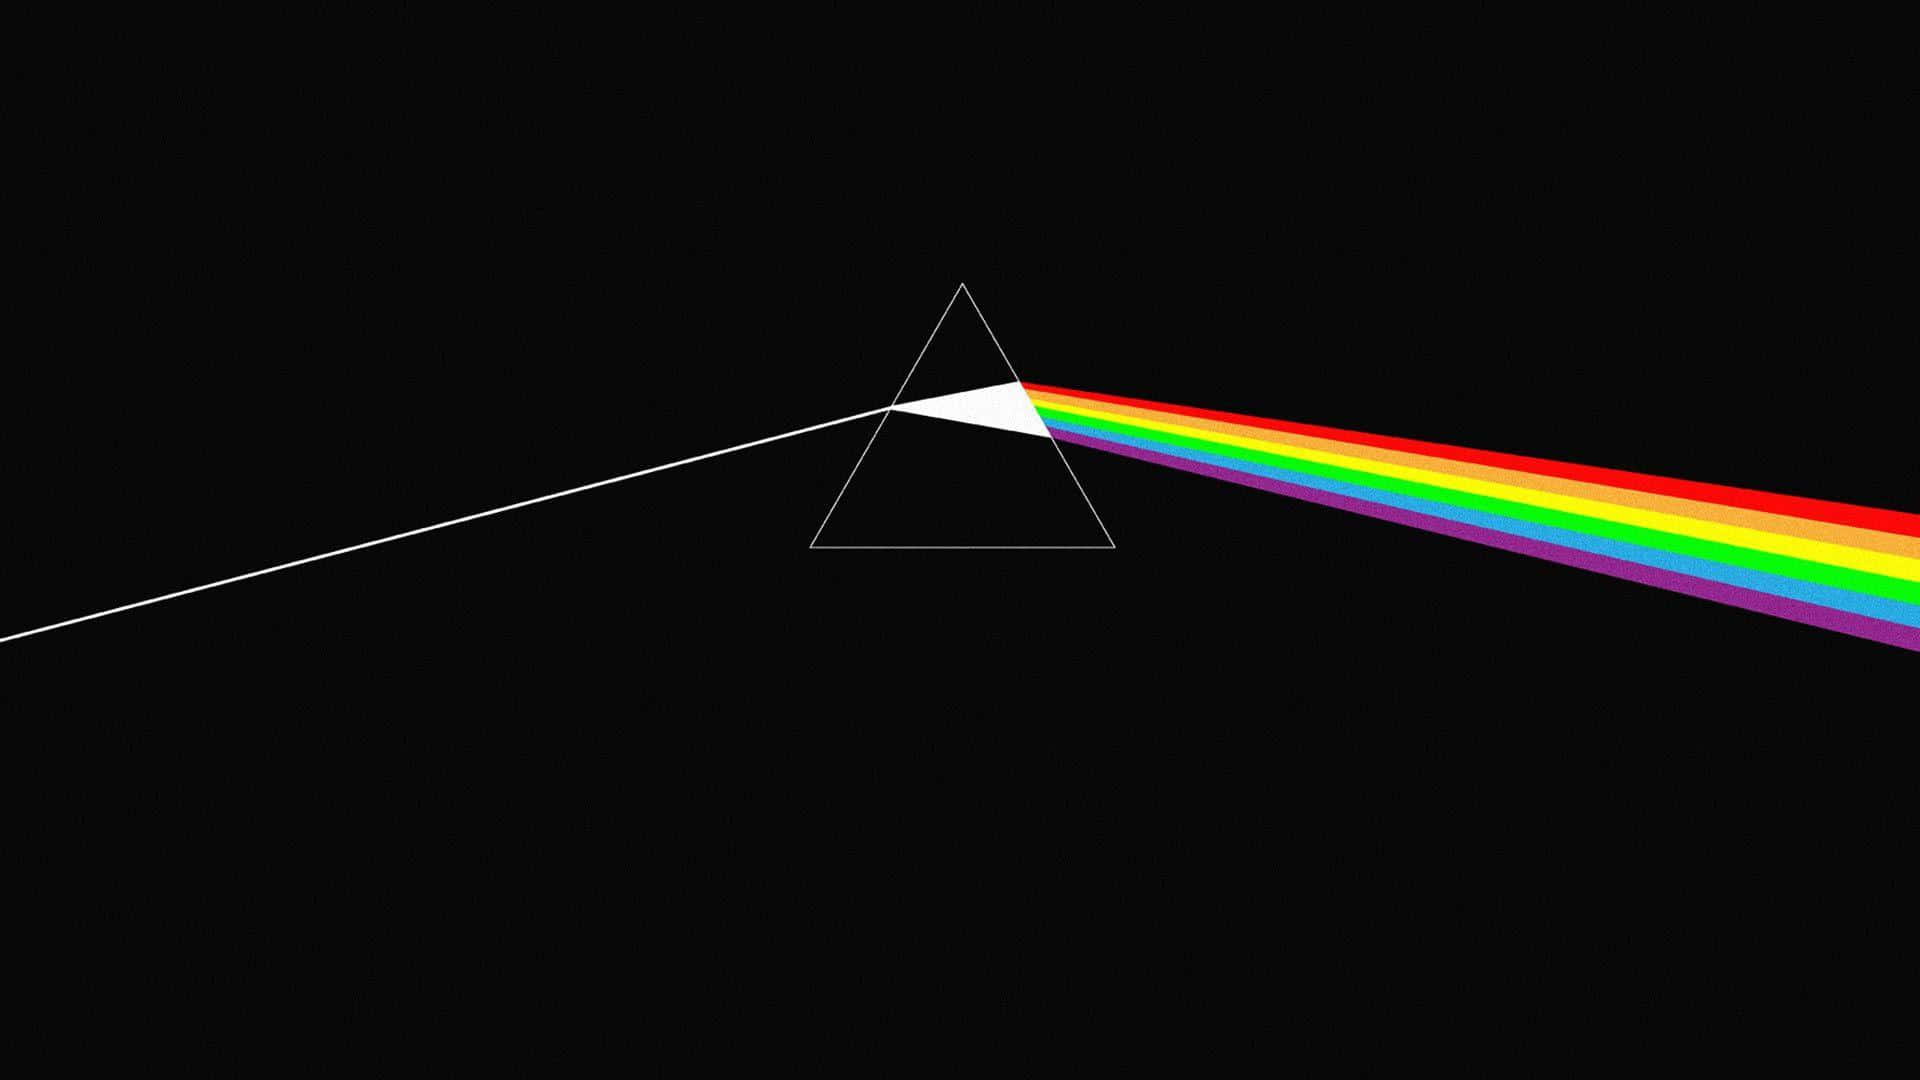 Experience the timeless musical masterpiece of Pink Floyd, Dark Side of the Moon Wallpaper